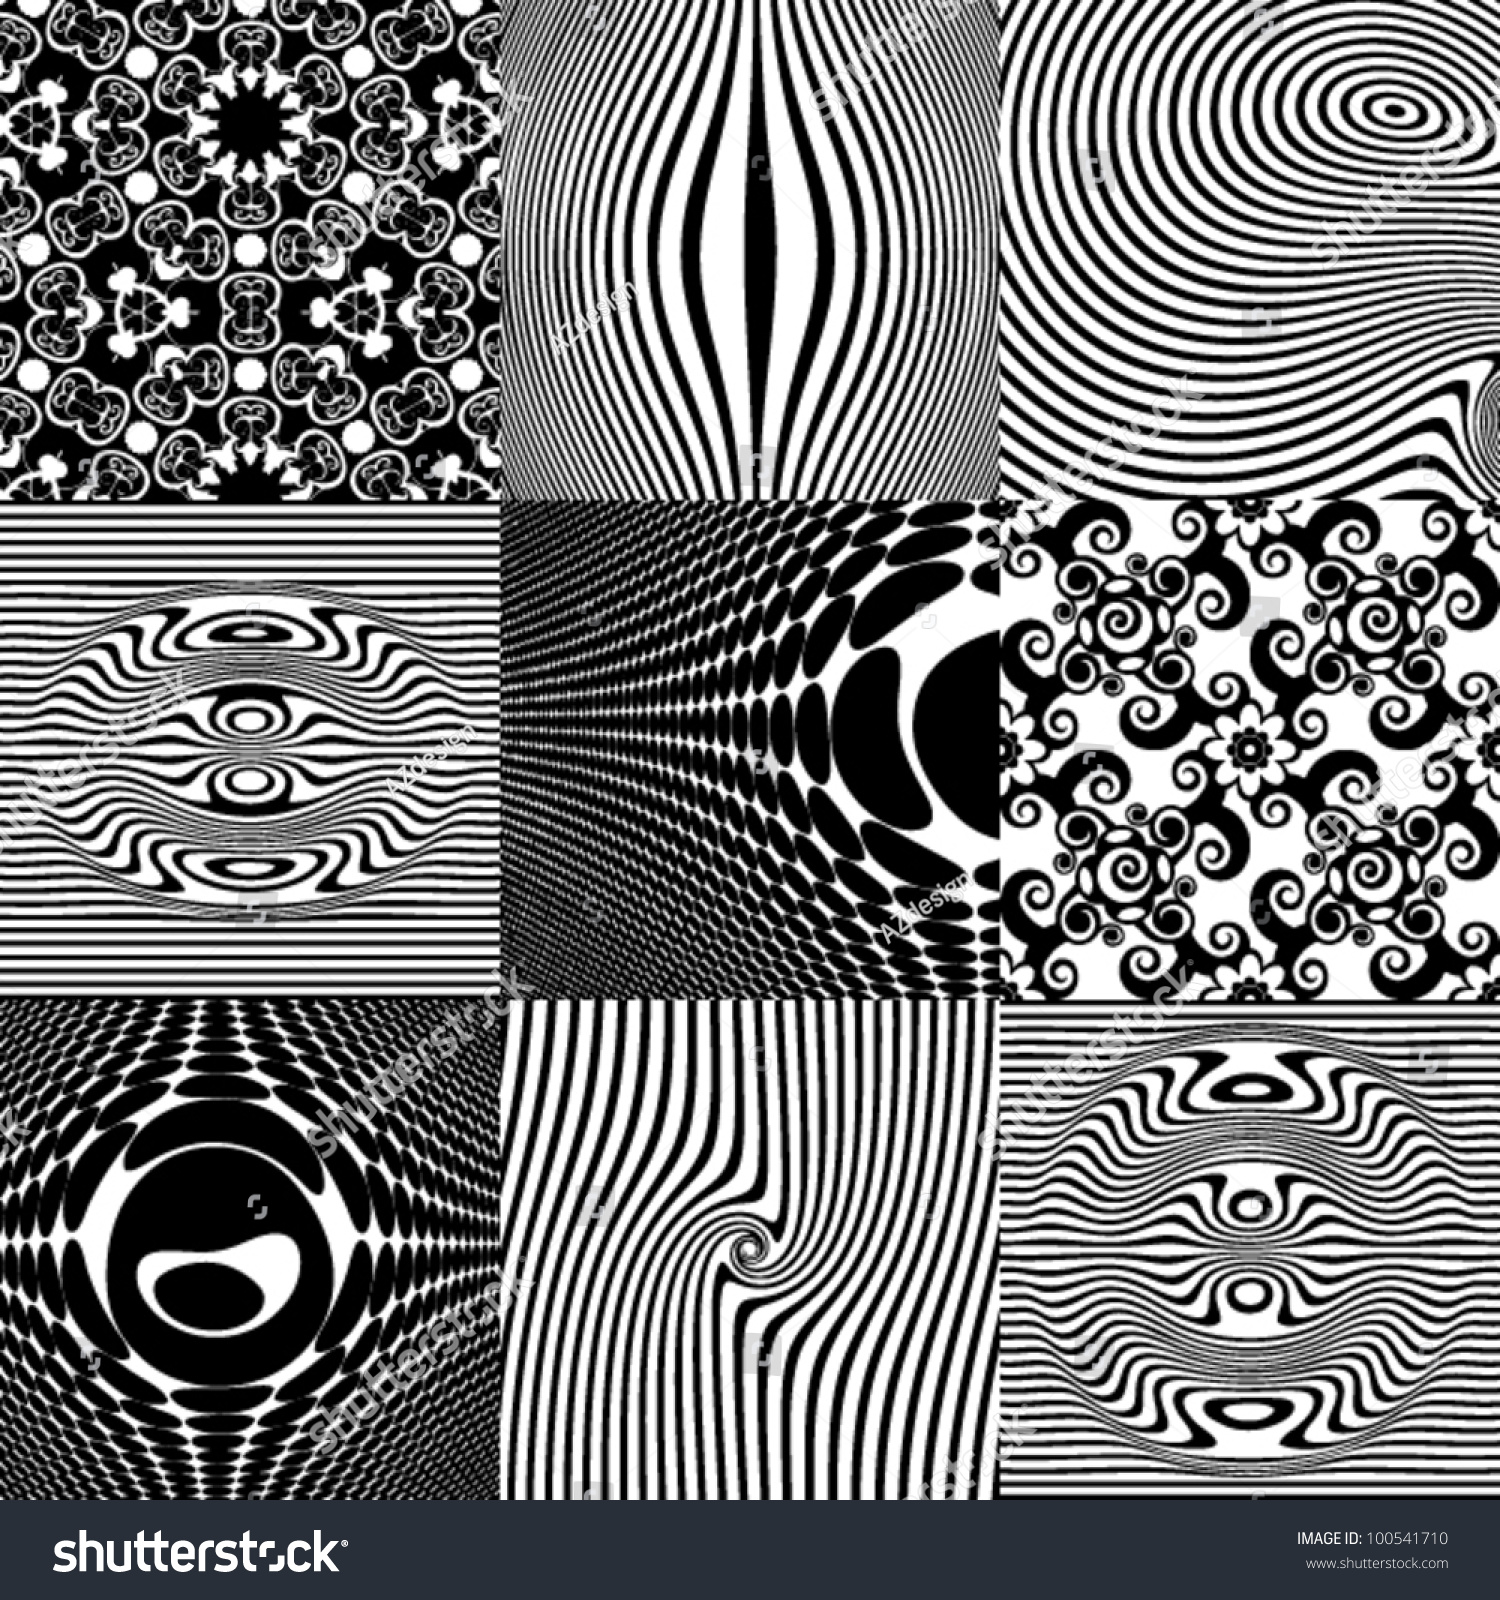 Optical Illusions, Abstract Patterns, Vector Design Elements ...